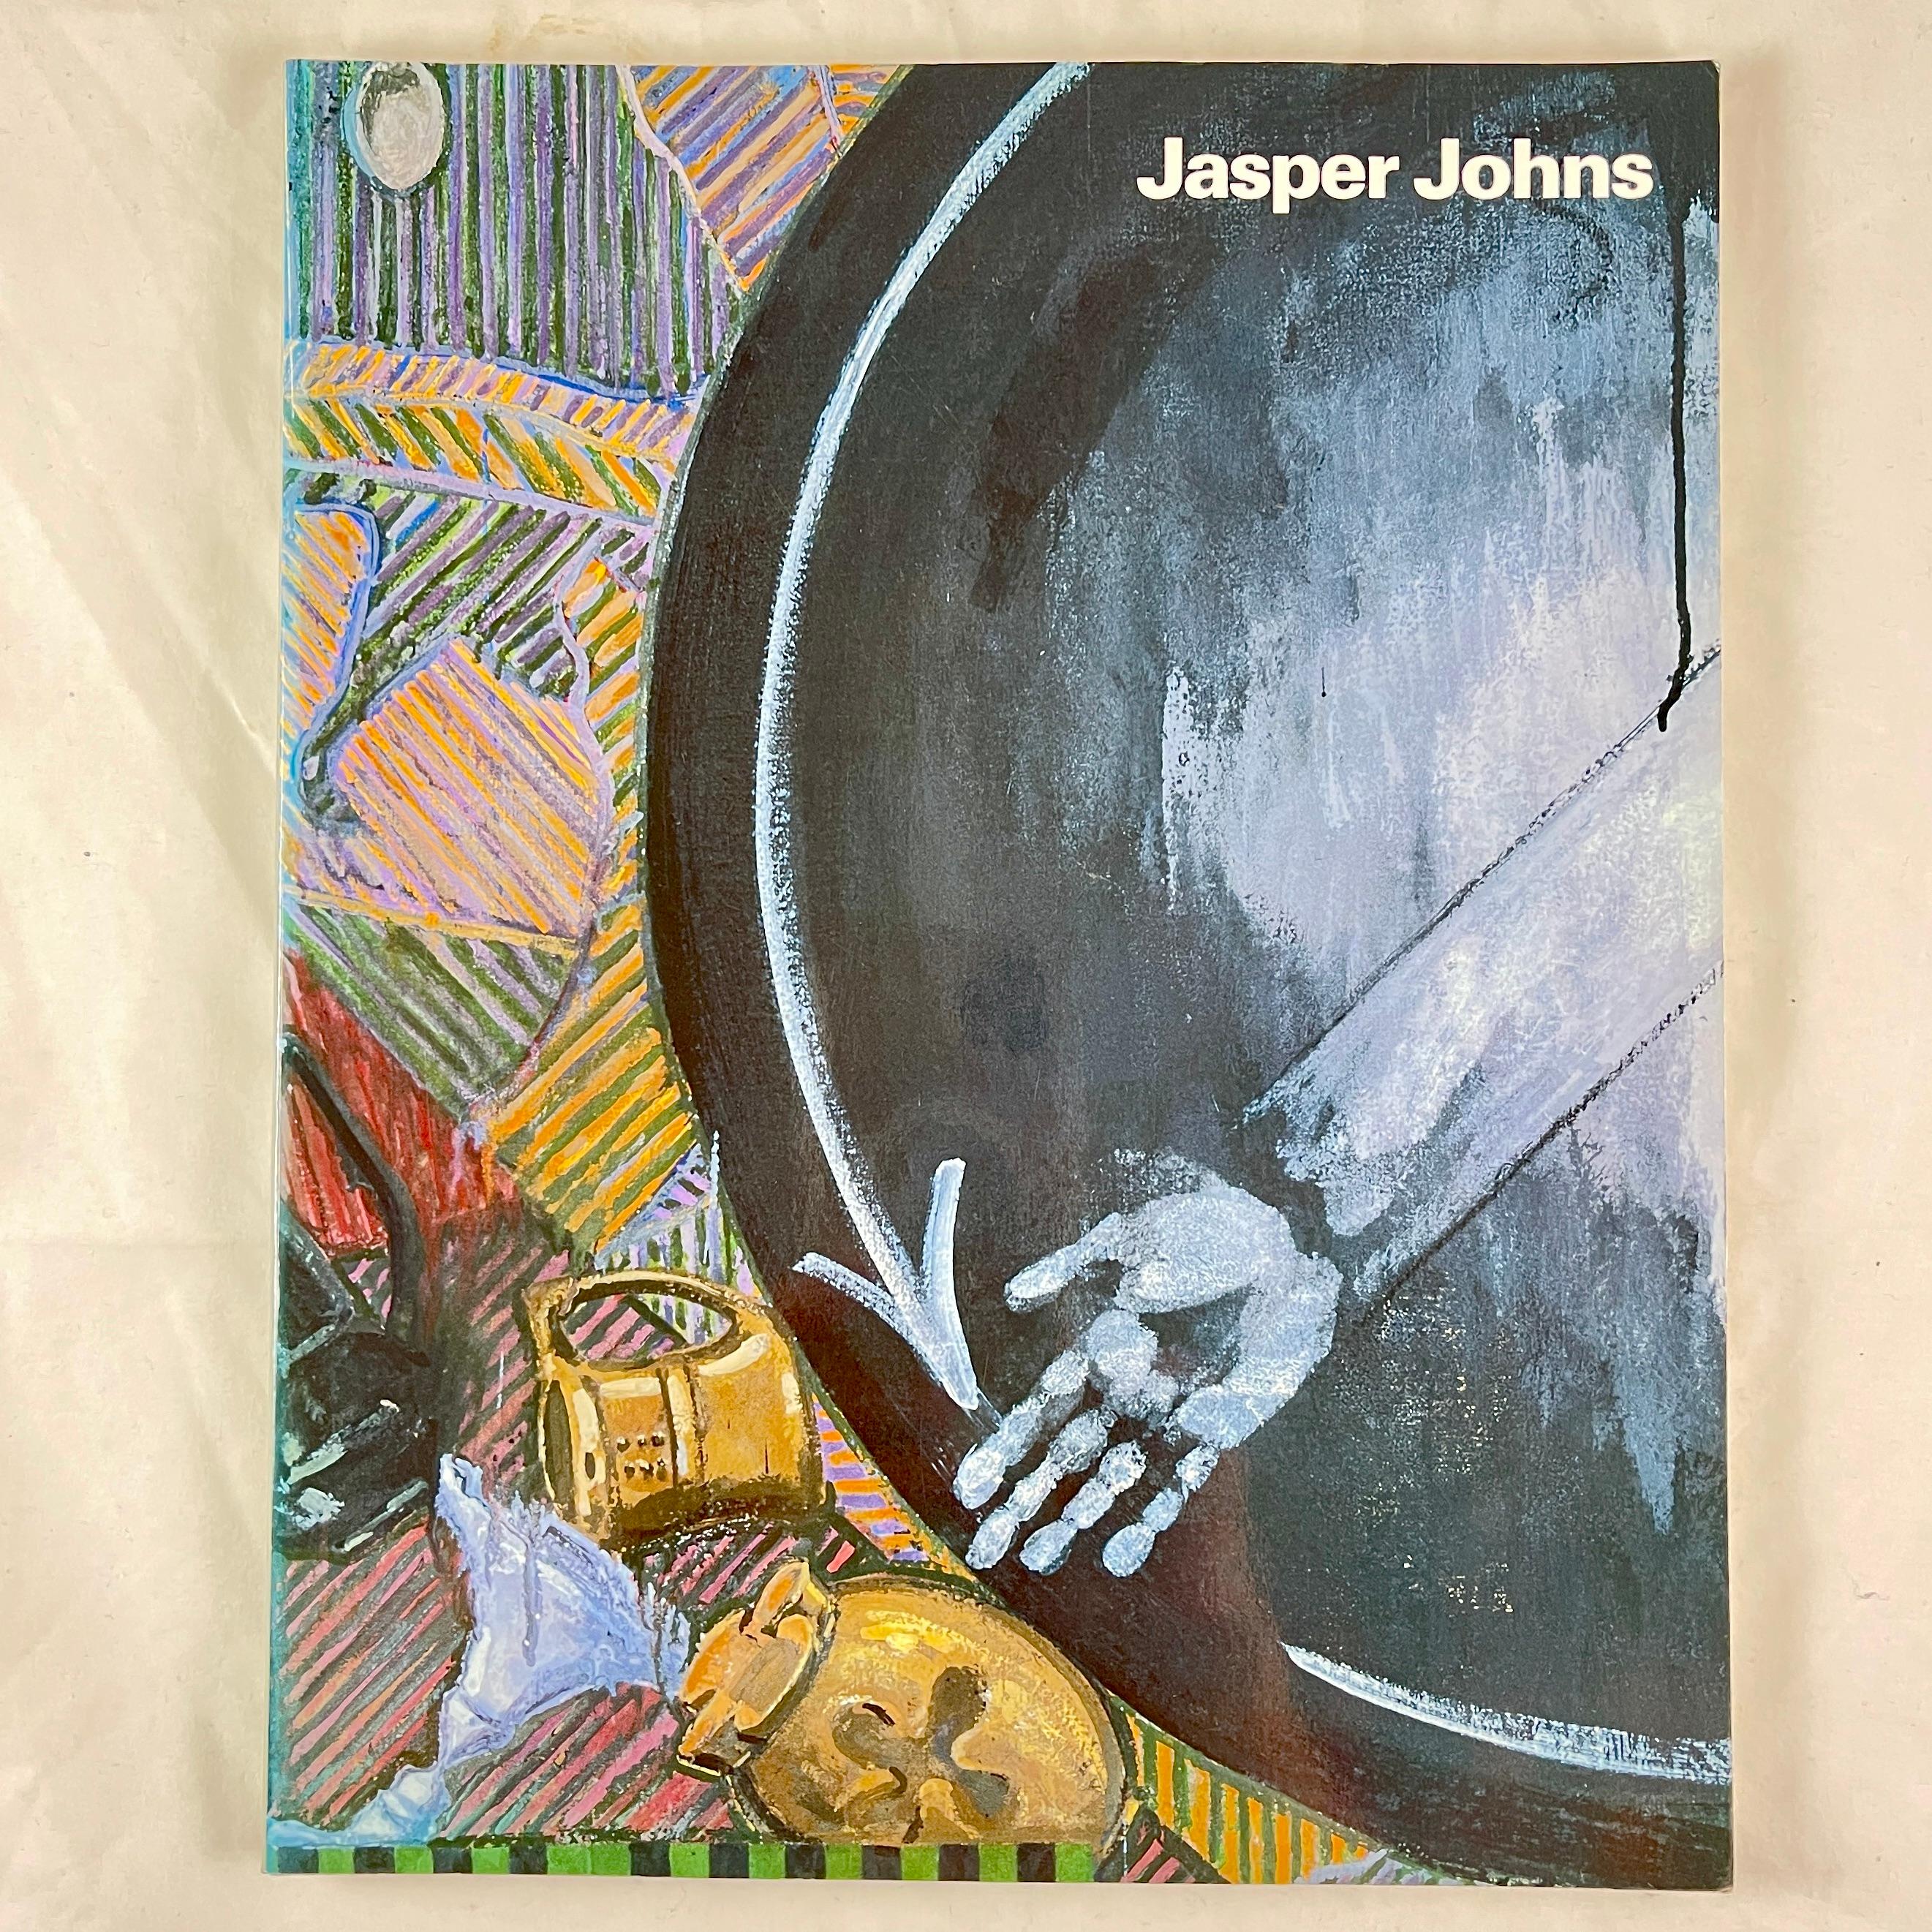 “Jasper Johns, Work Since 1974 ” by Mark Rosenthal, a Museum Edition Trade paperback, from the 1988 exhibition mounted at the Philadelphia Museum of Art.

Jasper Johns (born May 15, 1930) is an American painter, sculptor, and printmaker whose work